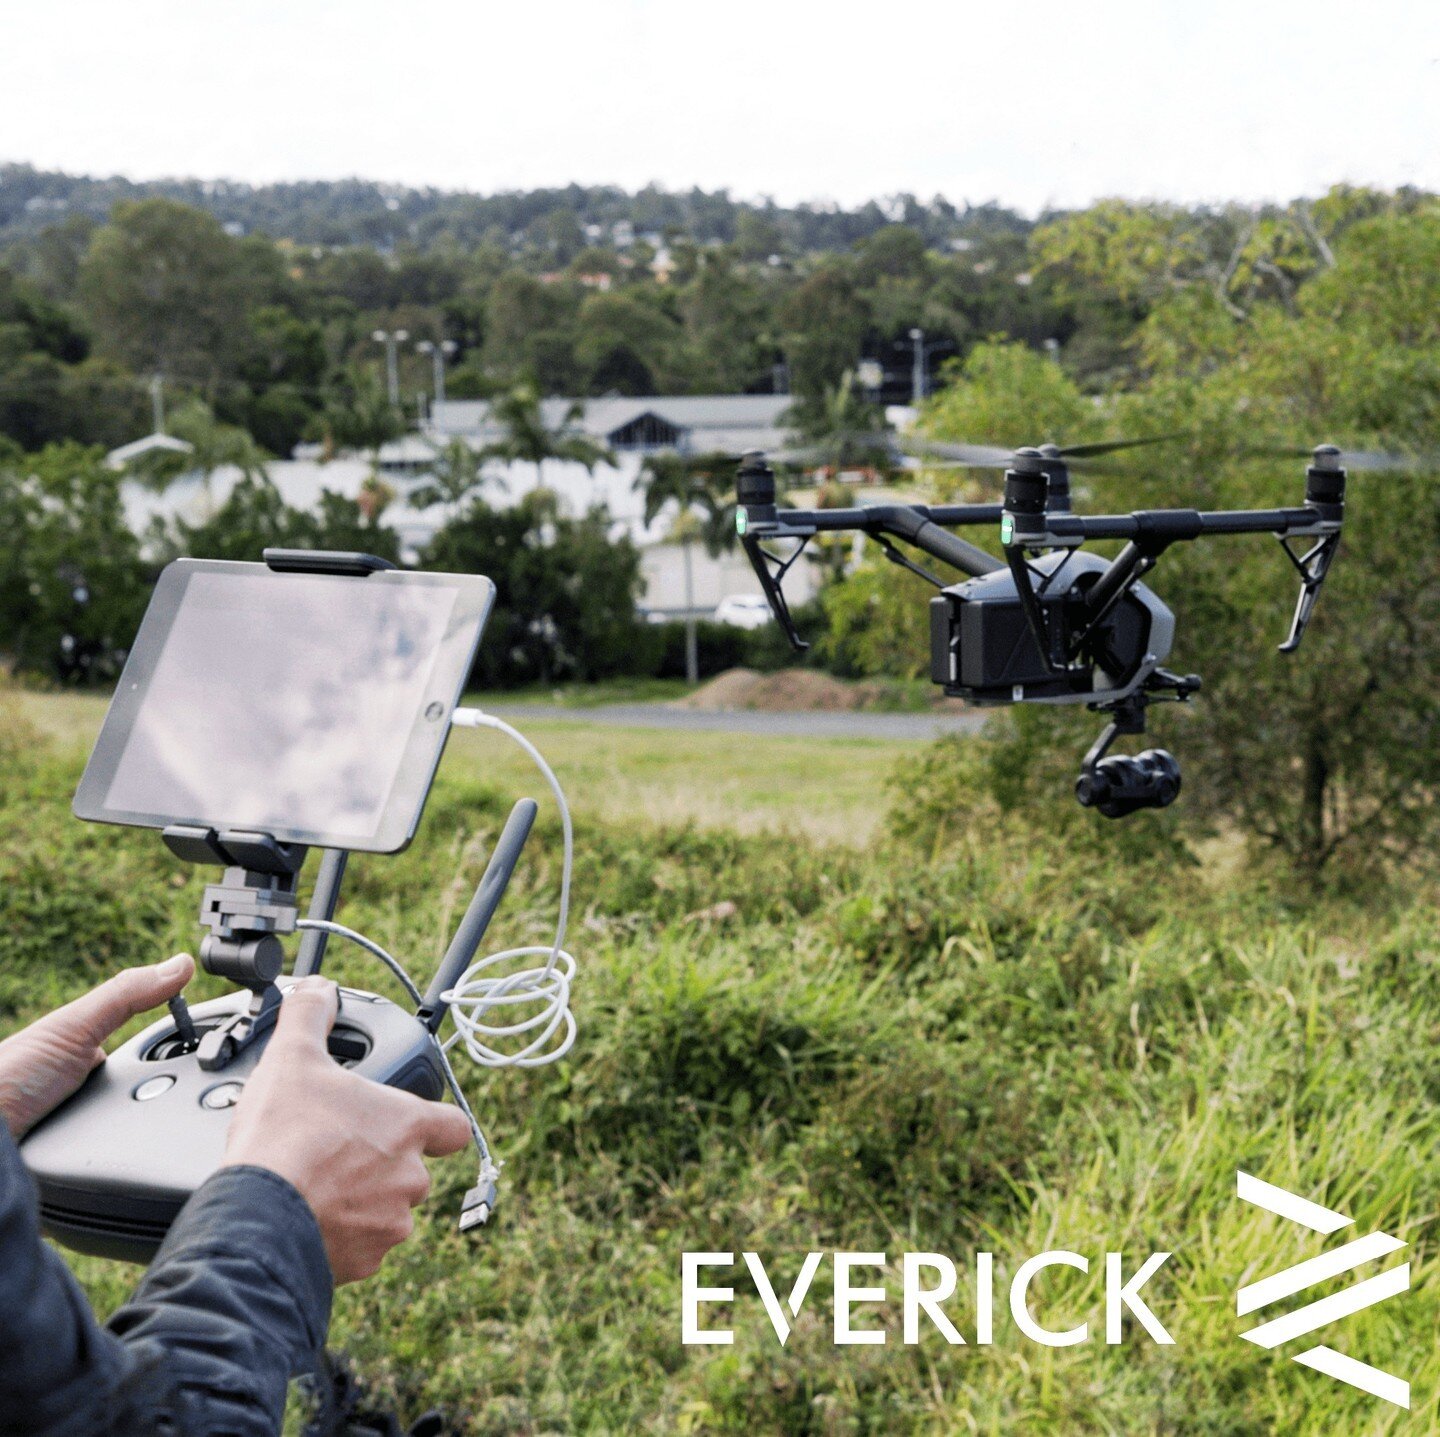 At Everick, the archaeology of the past, present and future are intertwined. Through innovative technologies, community outreach, and education, we achieve the best heritage outcomes for today. 
If you want to see how we achieve this, click the link 